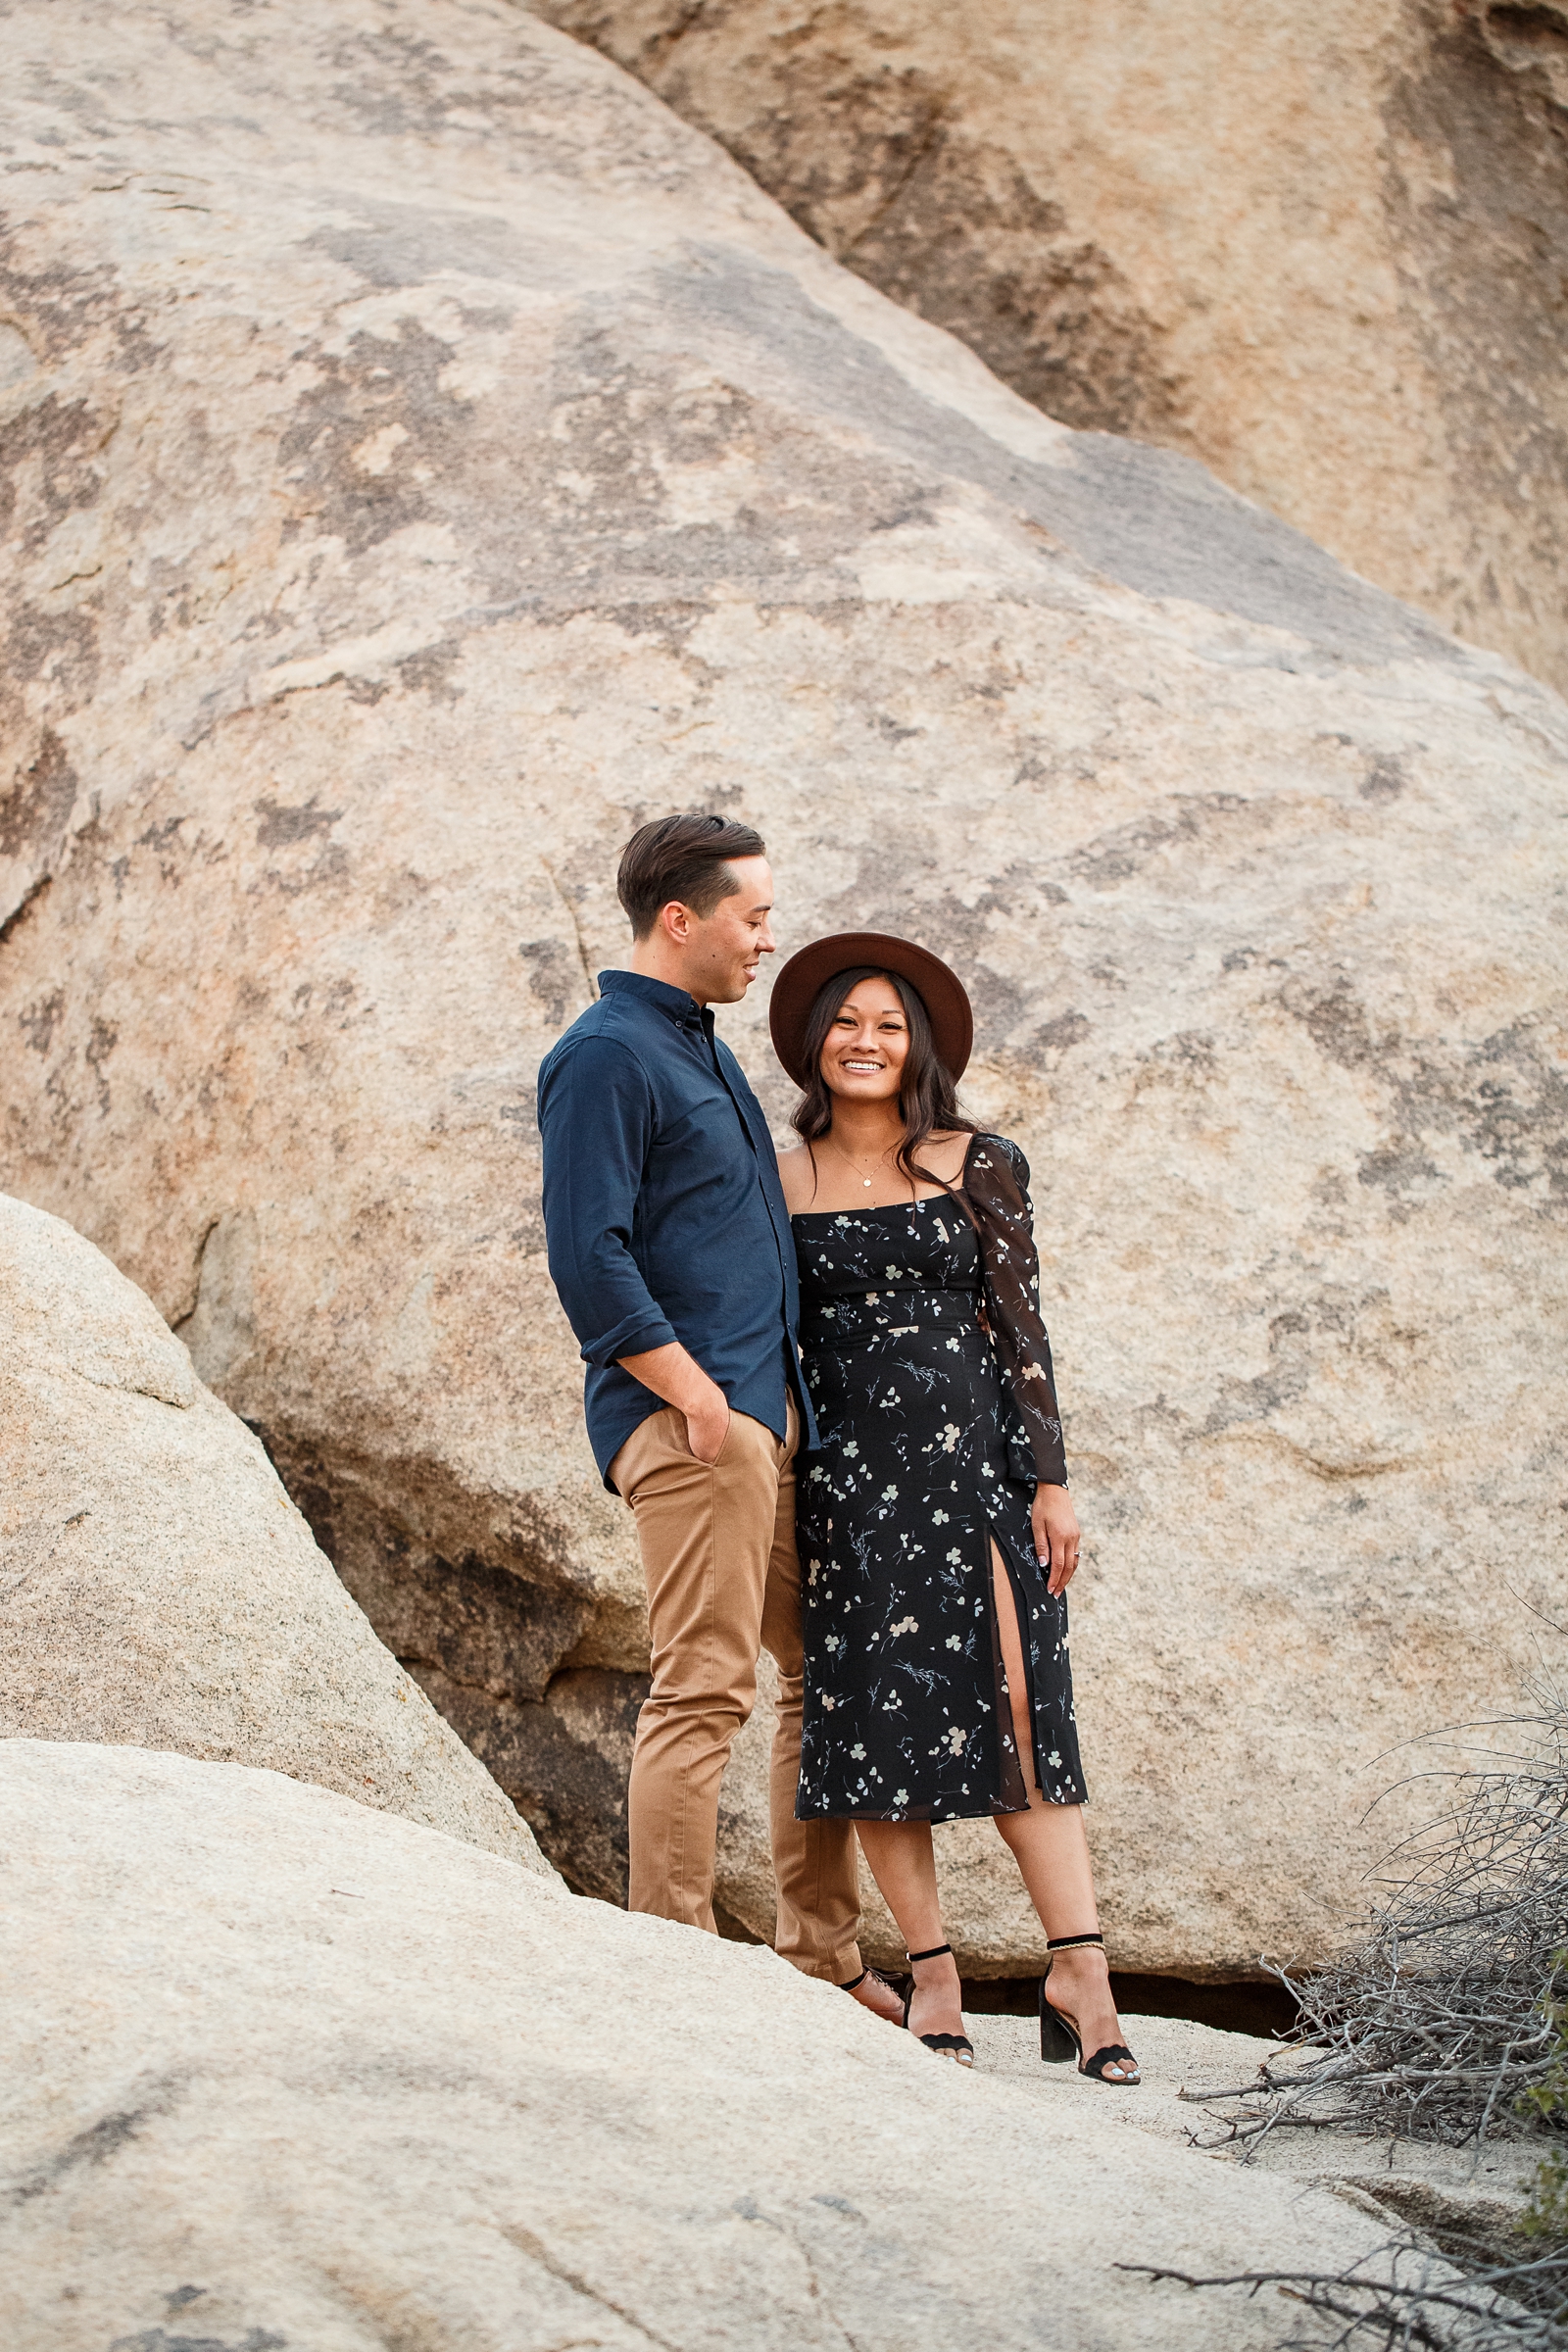 This engaged couple rock climbed in Joshua Tree.